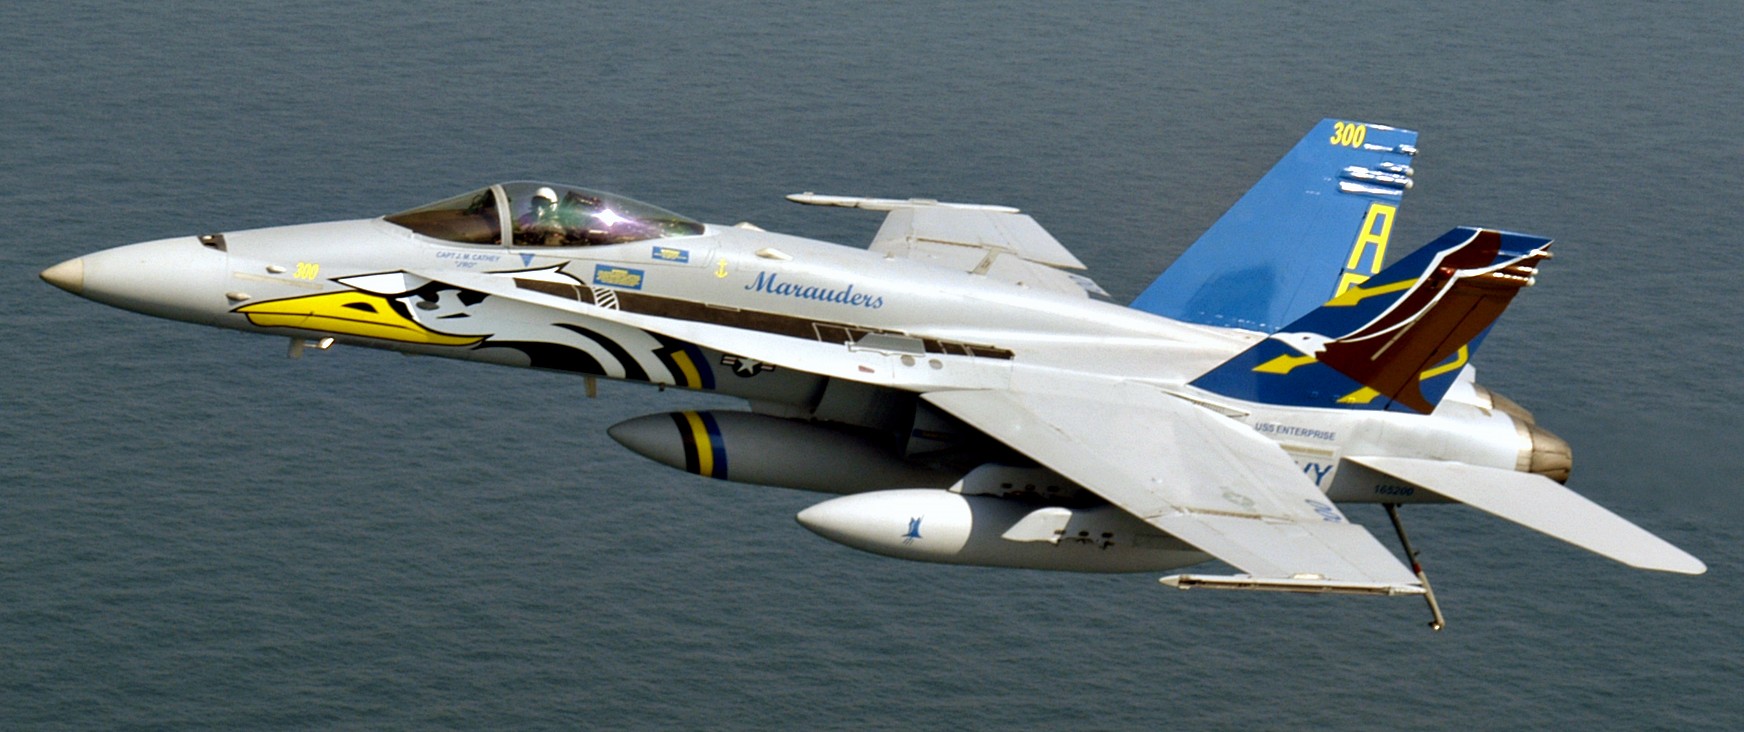 vfa-82 marauders strike fighter squadron us navy f/a-18c hornet